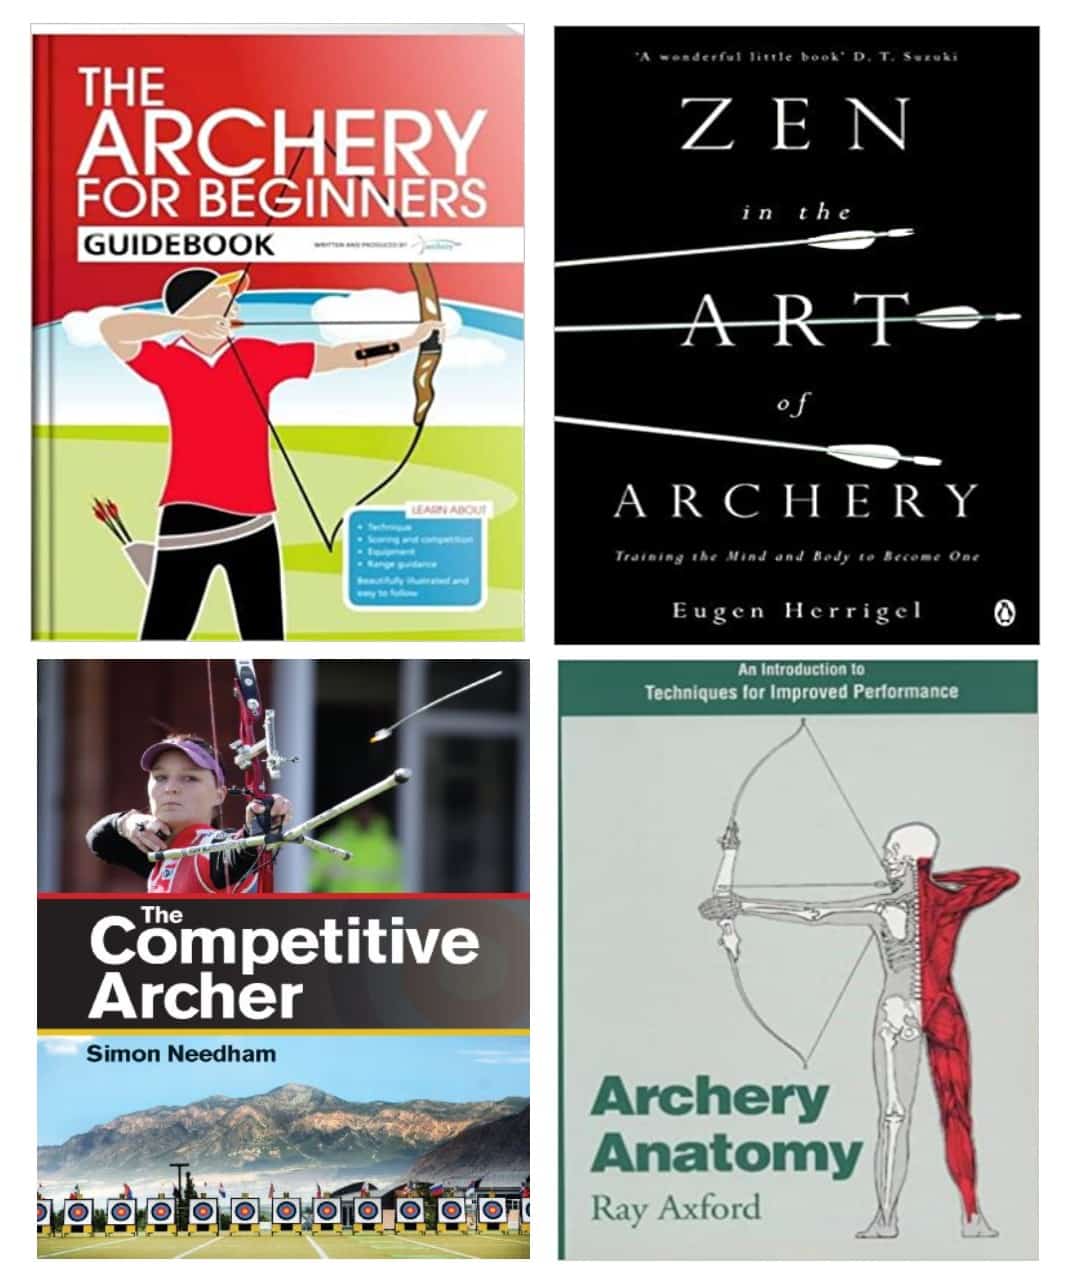 Archery books to mark World Book Day, 4 March 2021